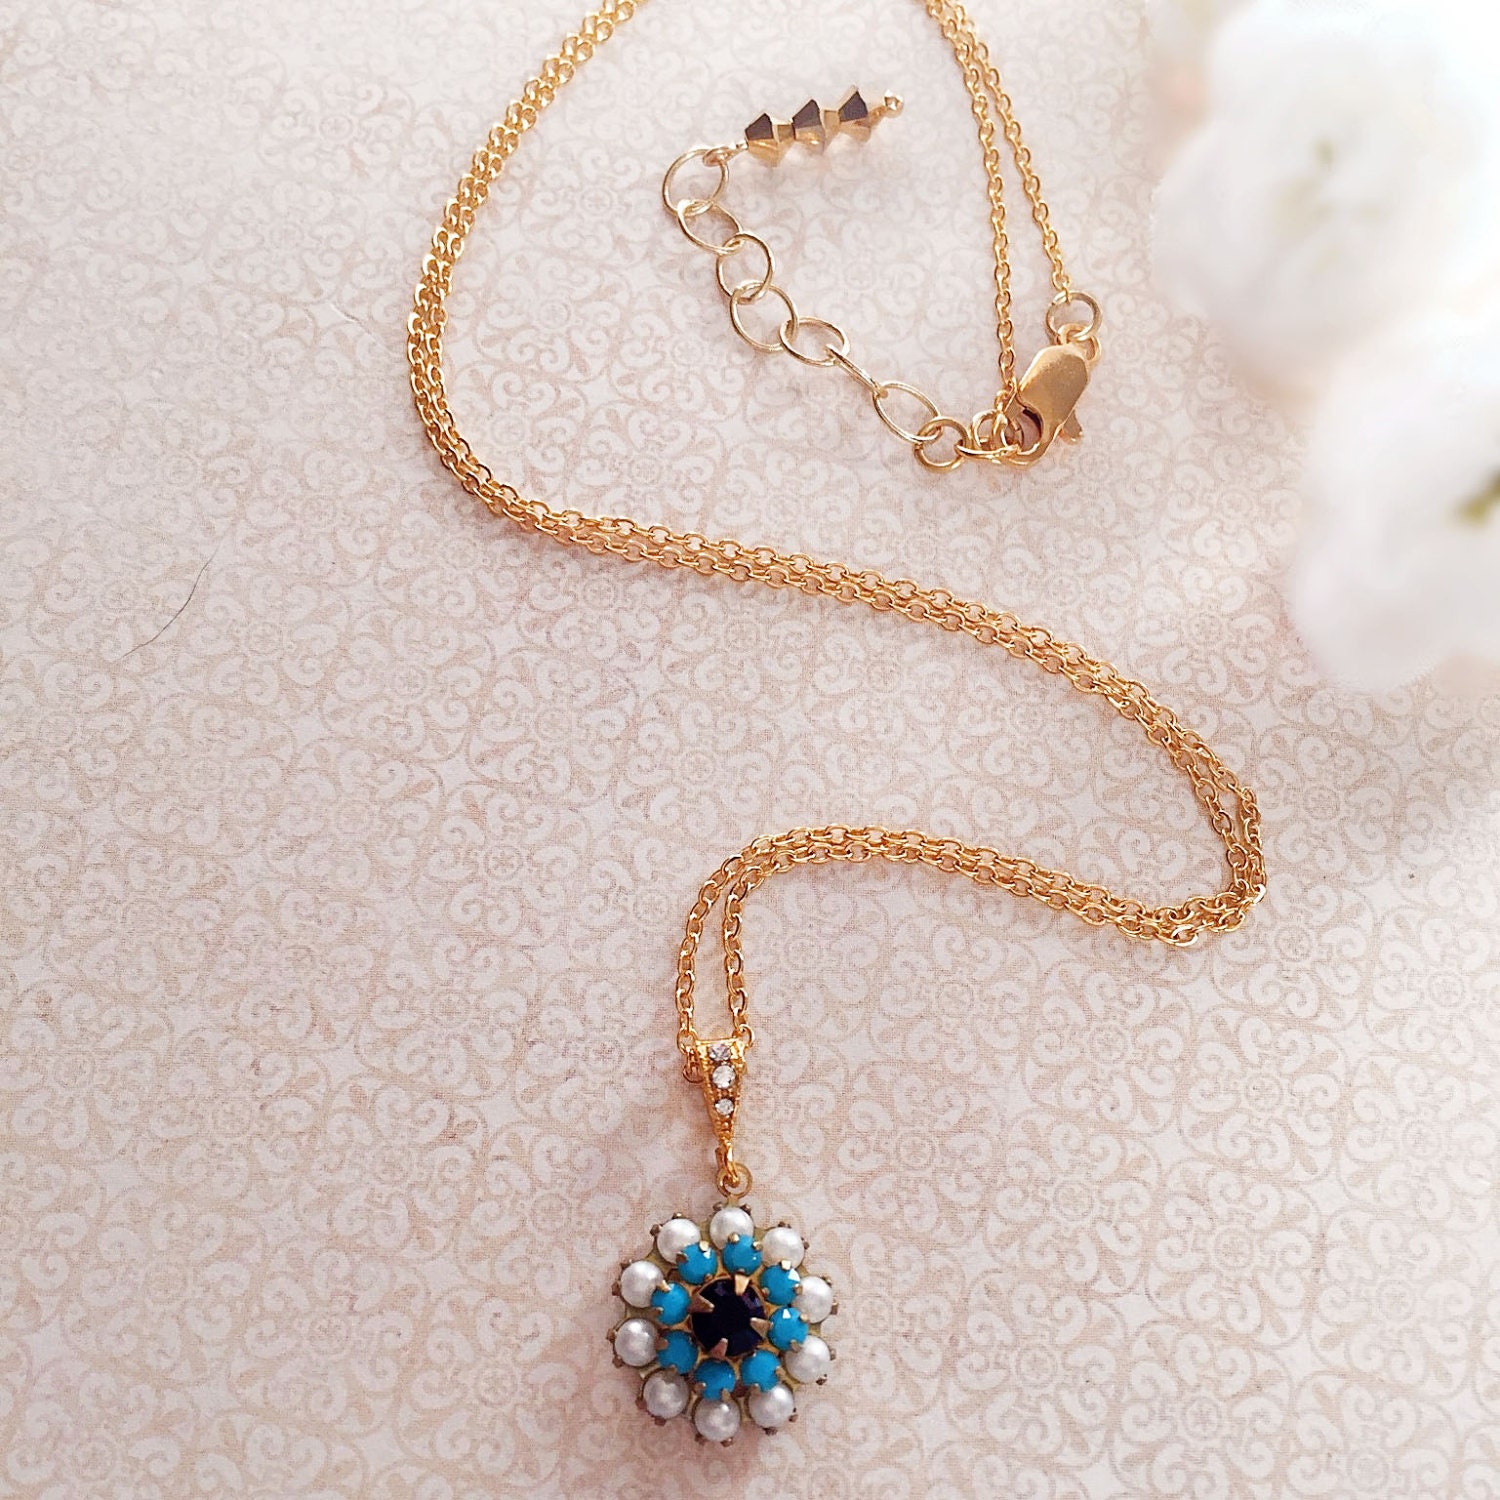 Flower Necklace - Spring Jewelry - Blue - Spring Necklace - Crystal - FIORE Cerulean